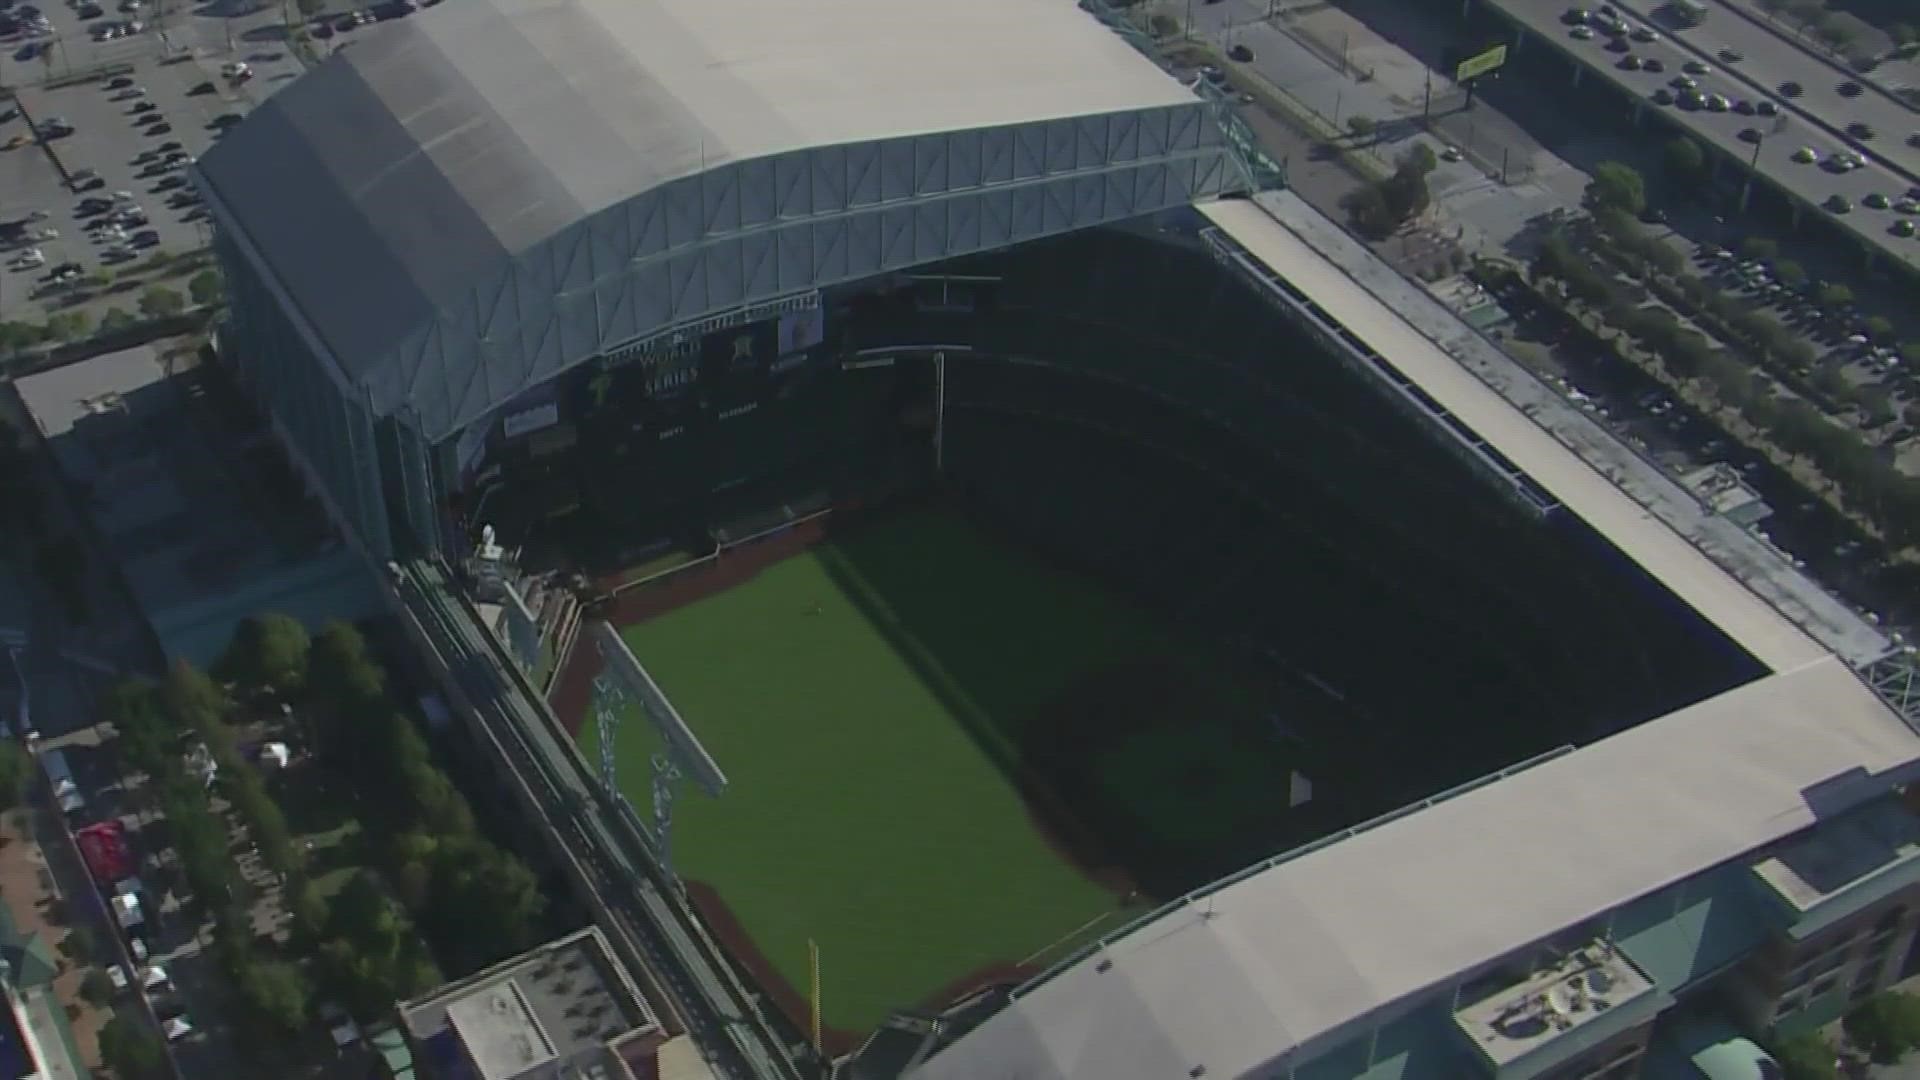 Views from Air 11 showed the World Series signs up at Minute Maid Park Thursday morning ahead of Game 1 in Houston.